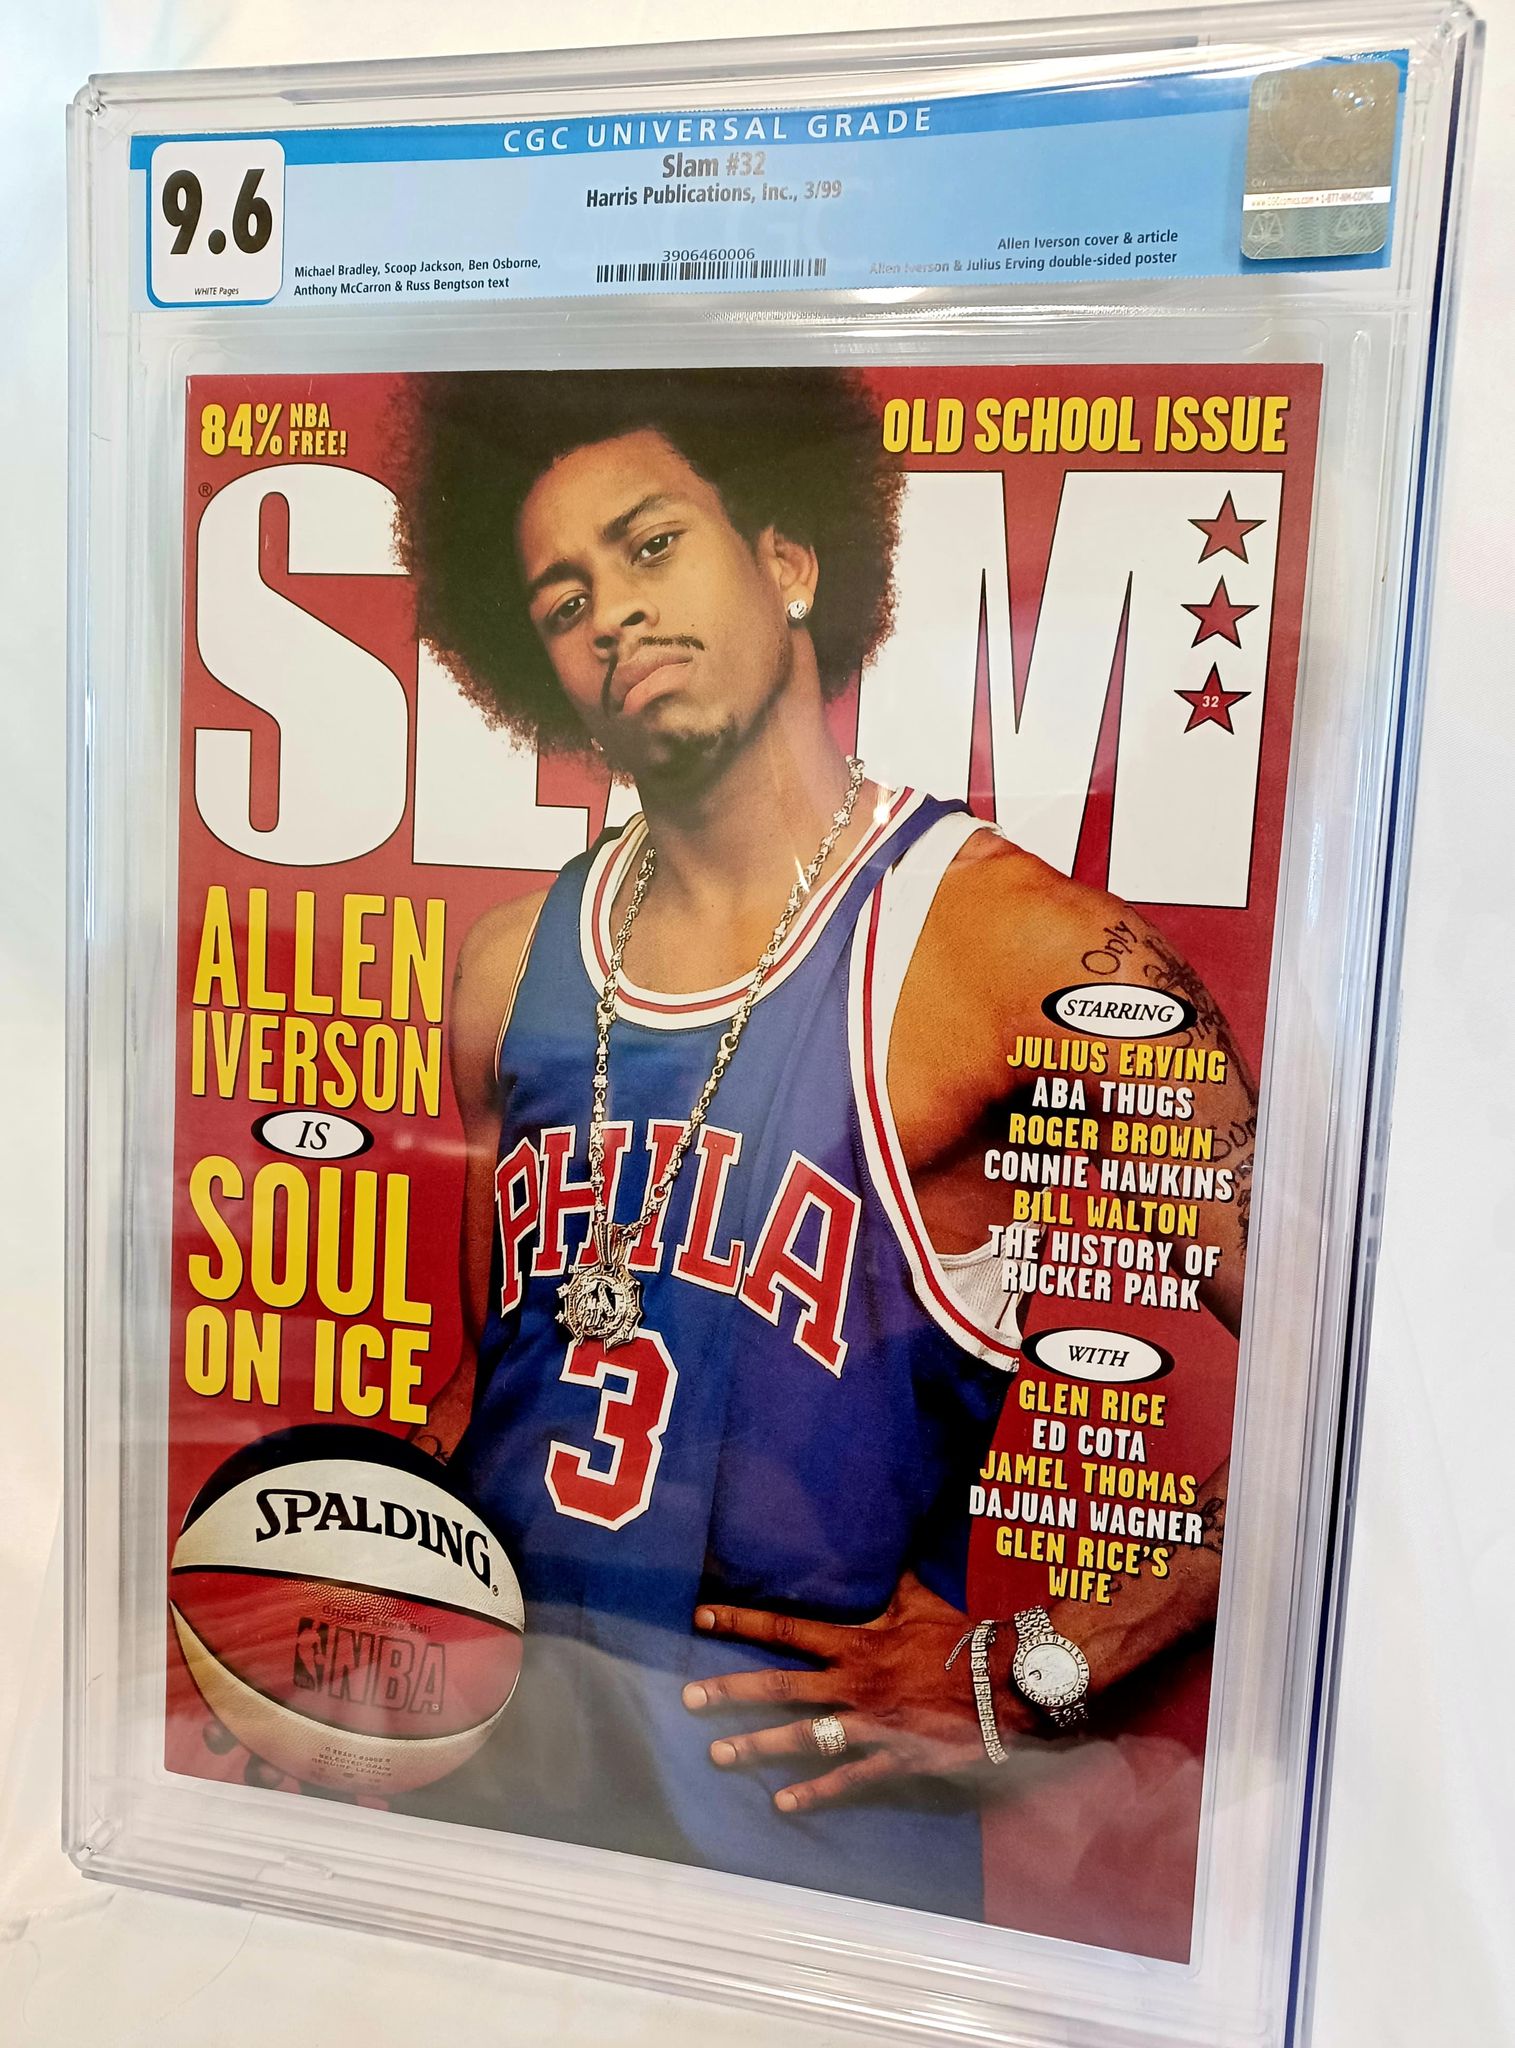 76ers used to hide Allen Iverson's jersey to keep him from playing